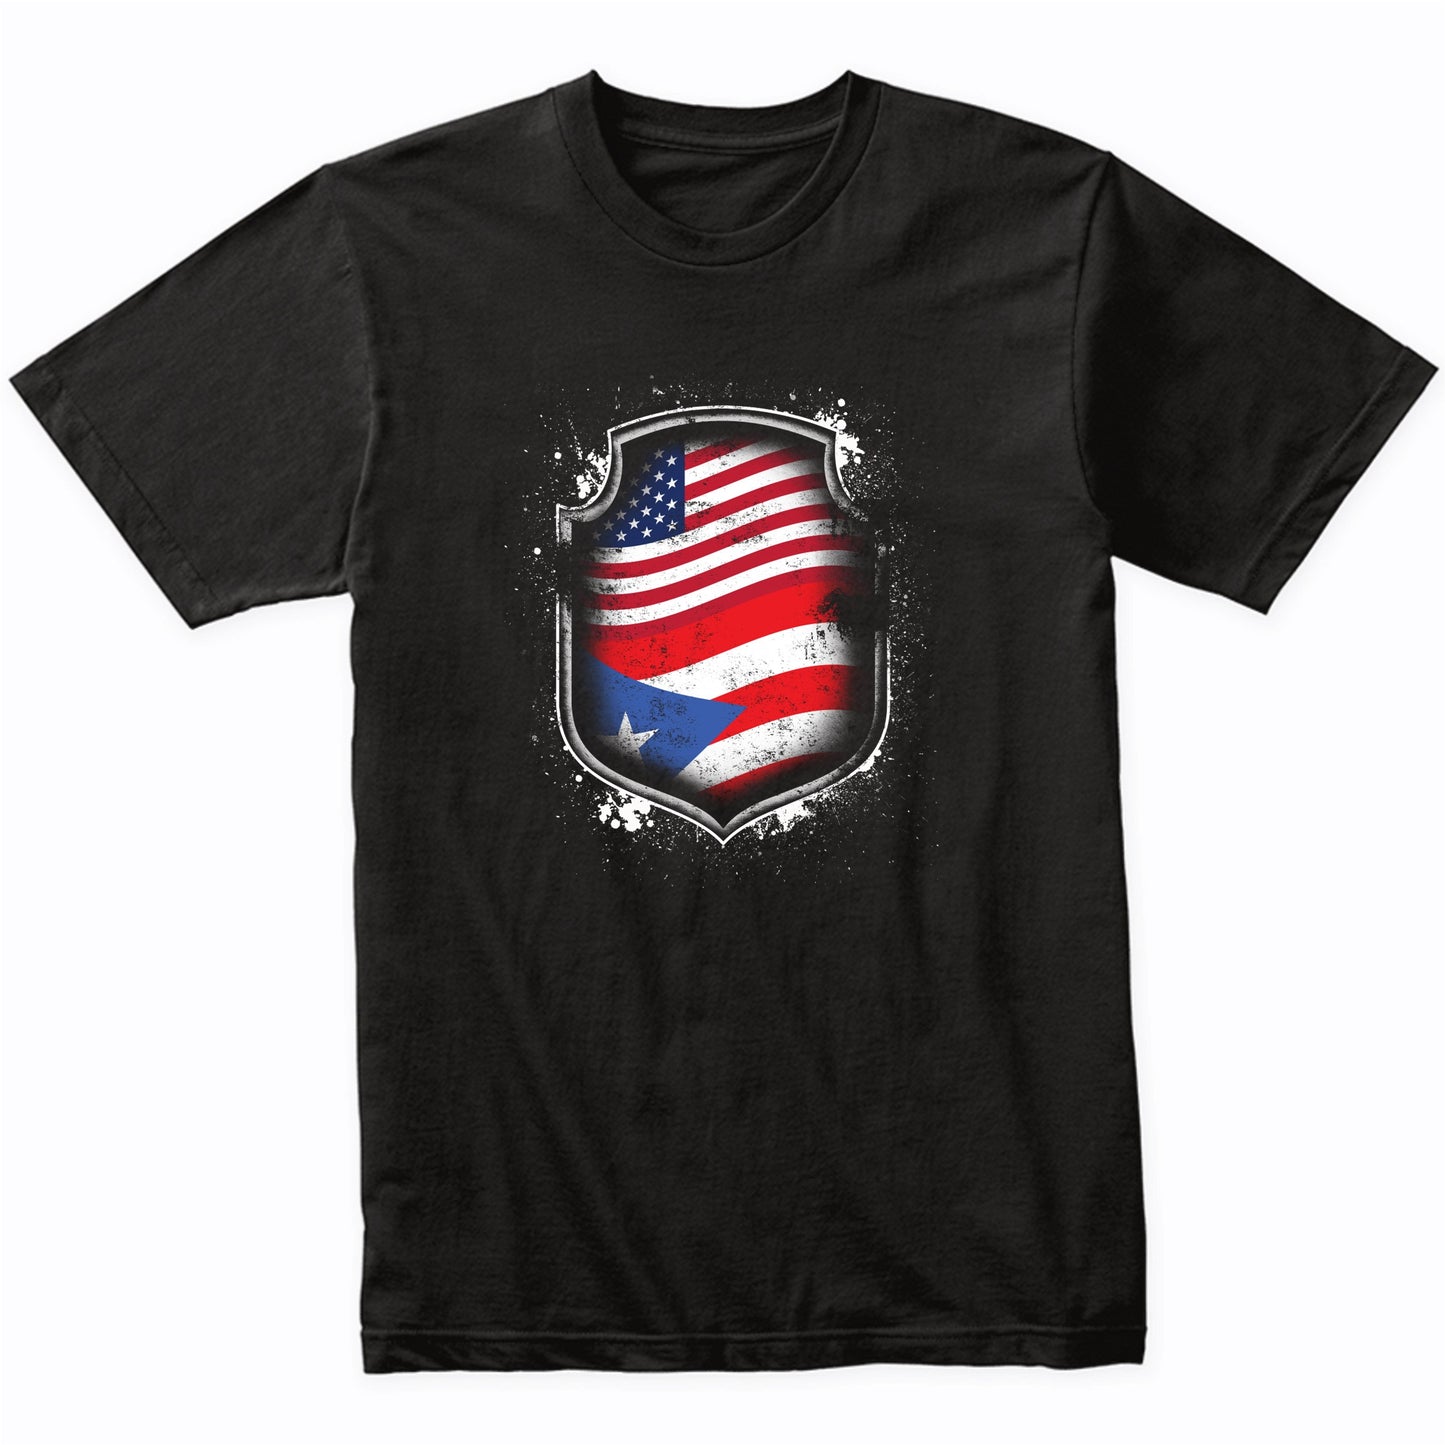 Puerto Rican American Shirt Flags Of Puerto Rico and America T-Shirt